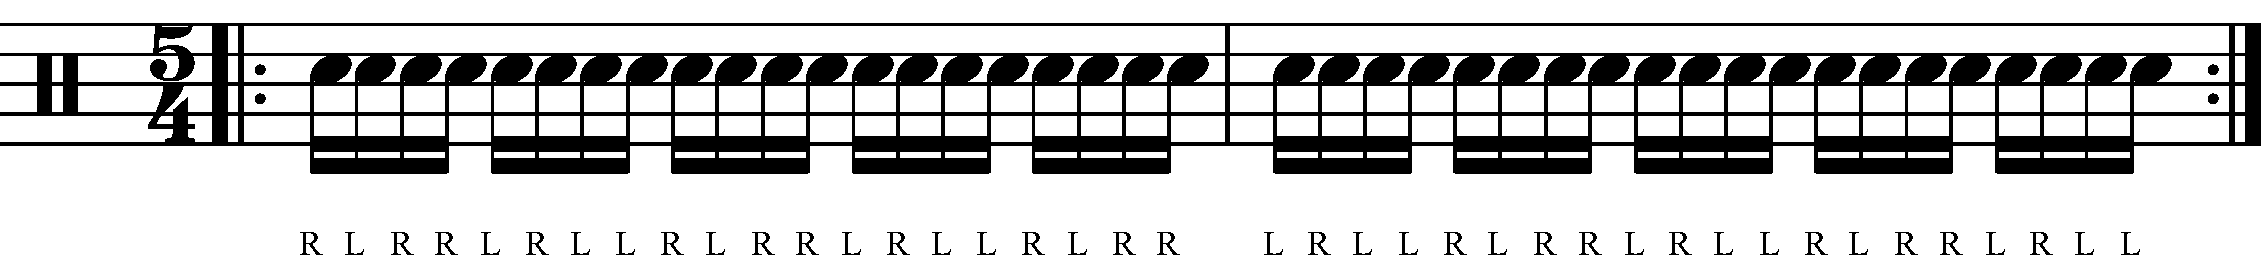 A Paradiddle in 5/4 with standard sticking